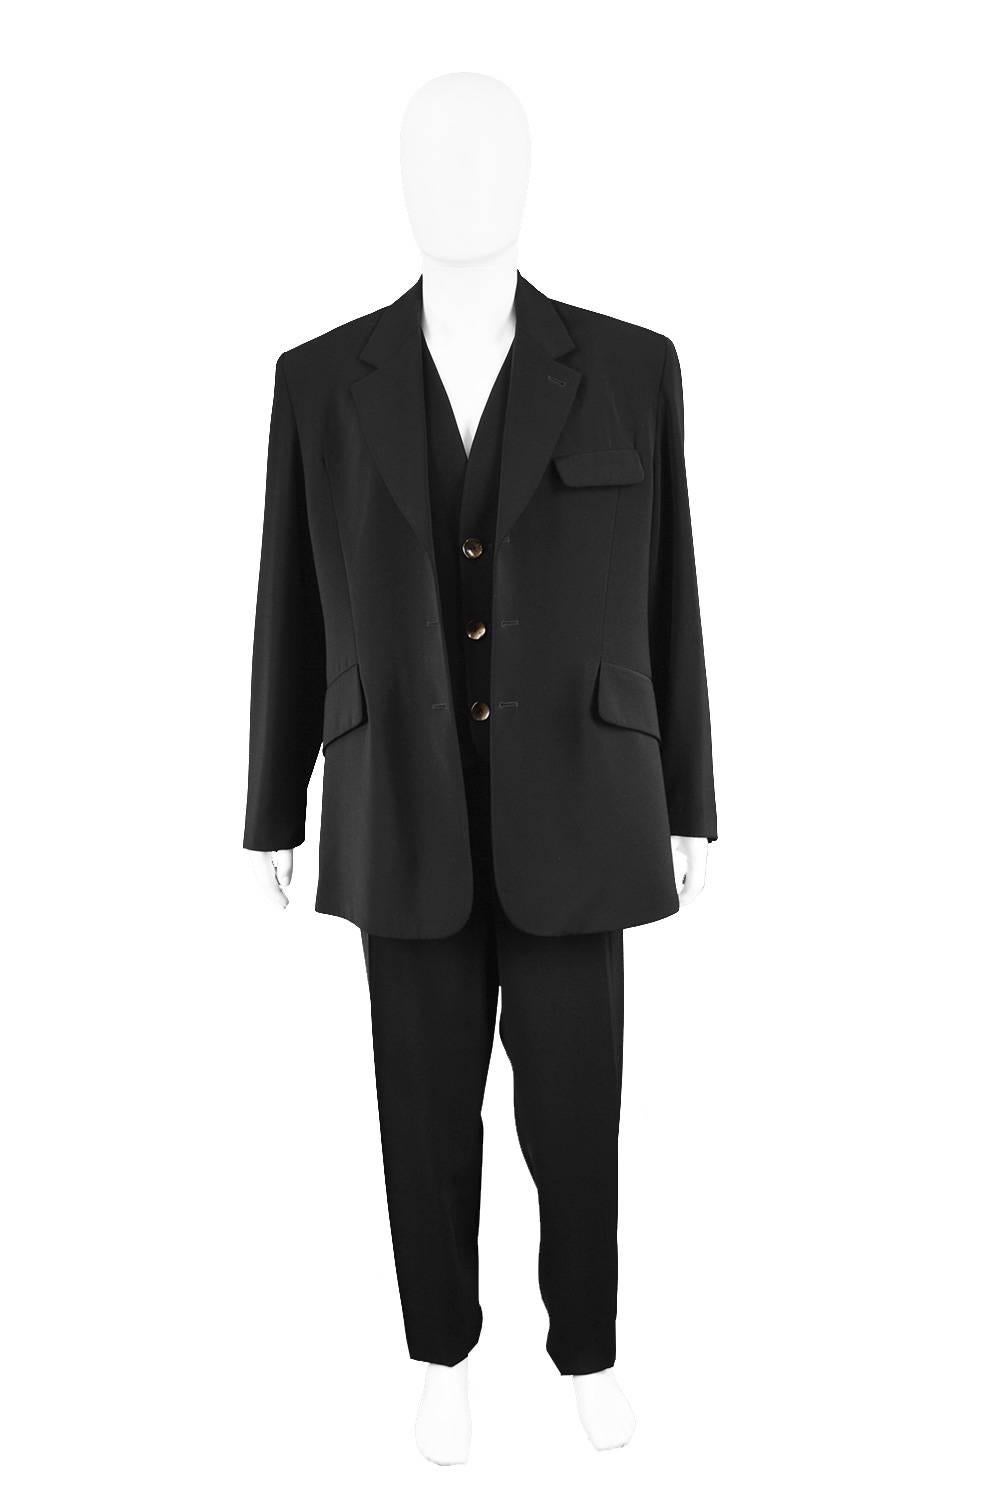 Calugi e Gianelli Vintage 1980s Mens Party Suit with Built in Vest Waistcoat

Size: Marked Italian 52 which is a men's Large. Please check measurements
Chest (when jacket is closed) - 44” / 111cm (allow a couple of inches room for movement)
Waist -